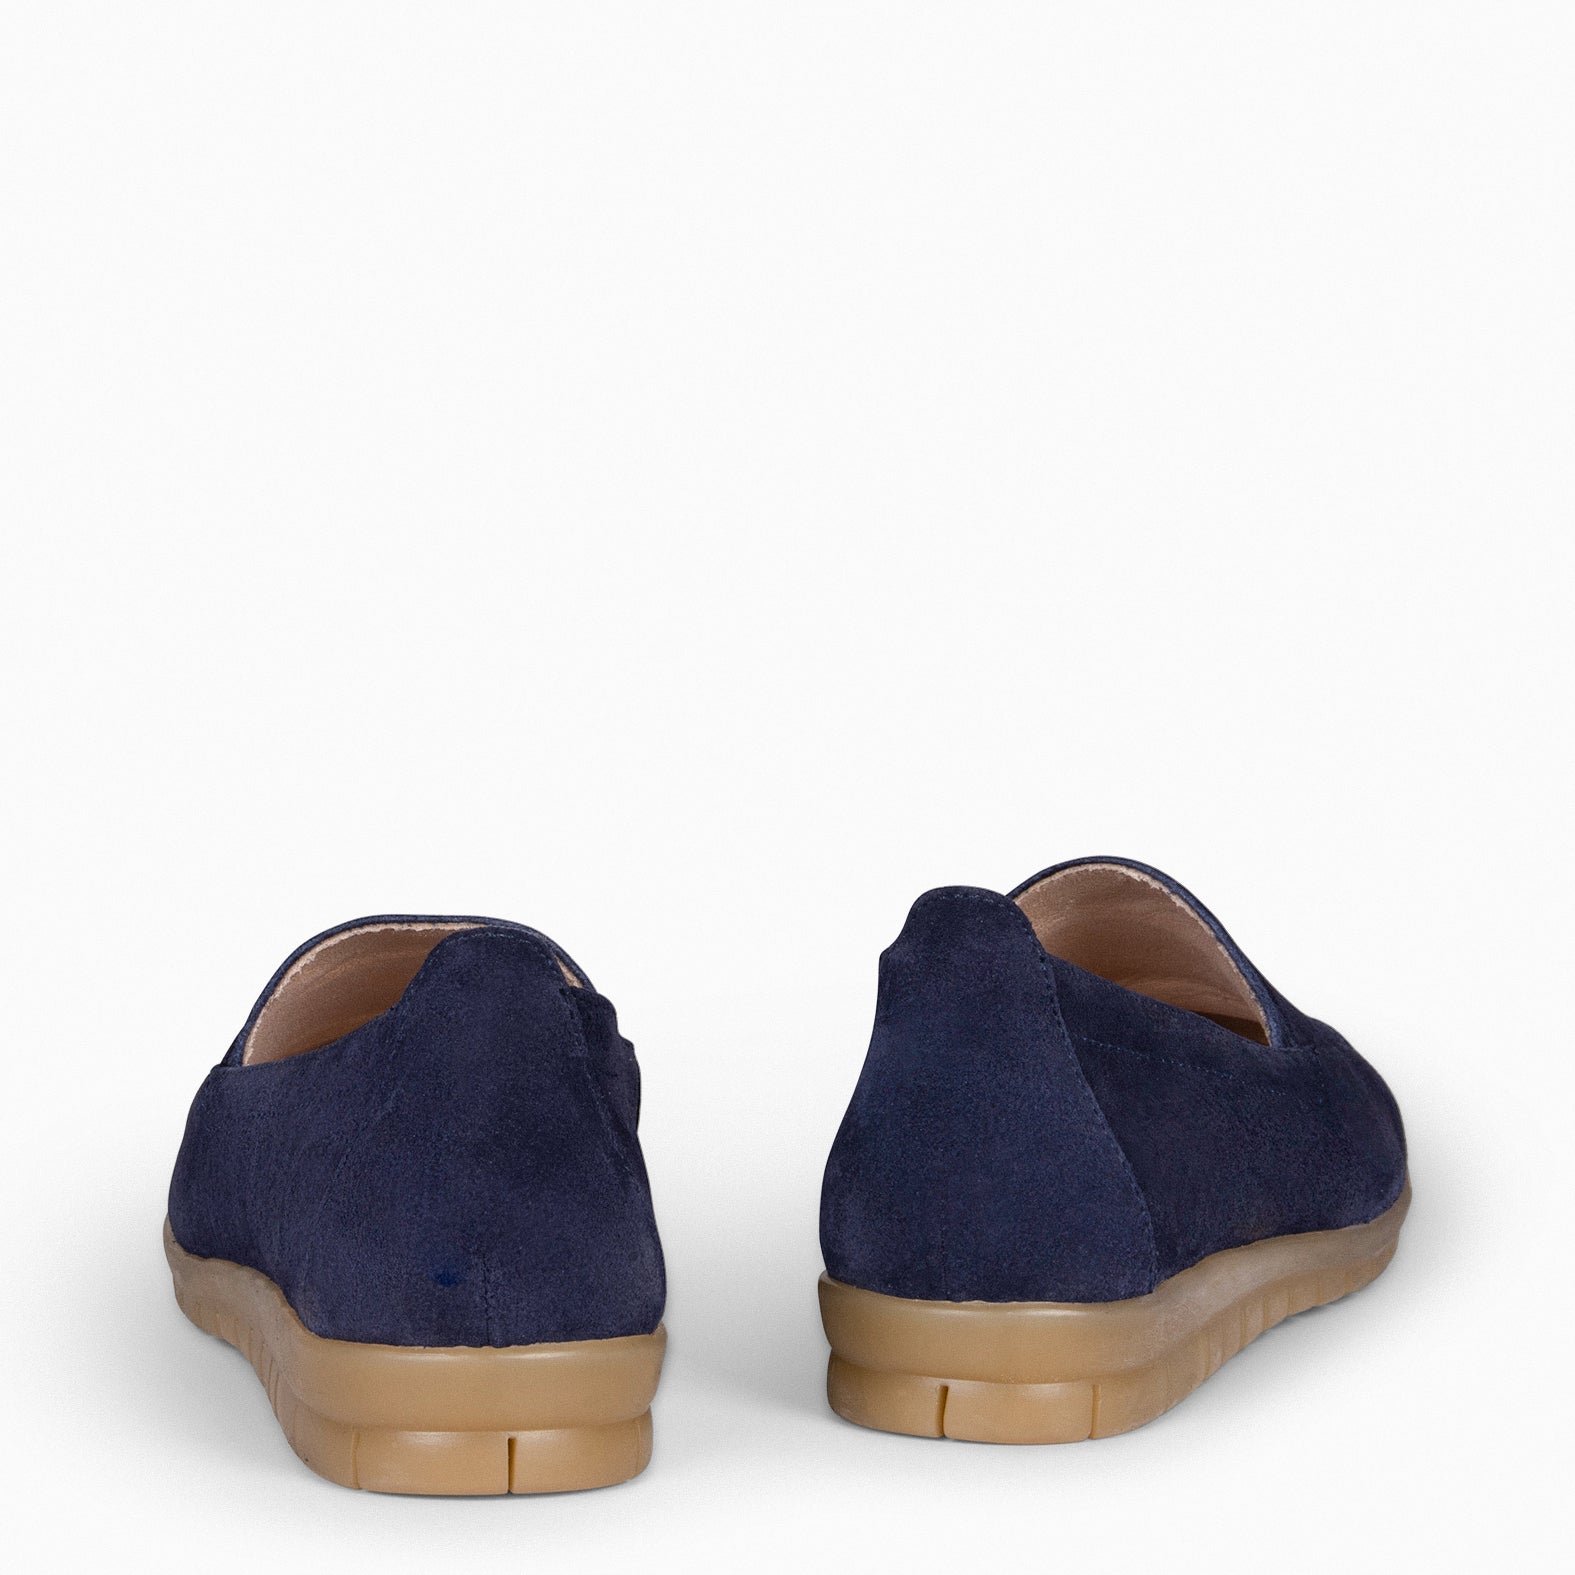 360 – BLUE moccasins with mask